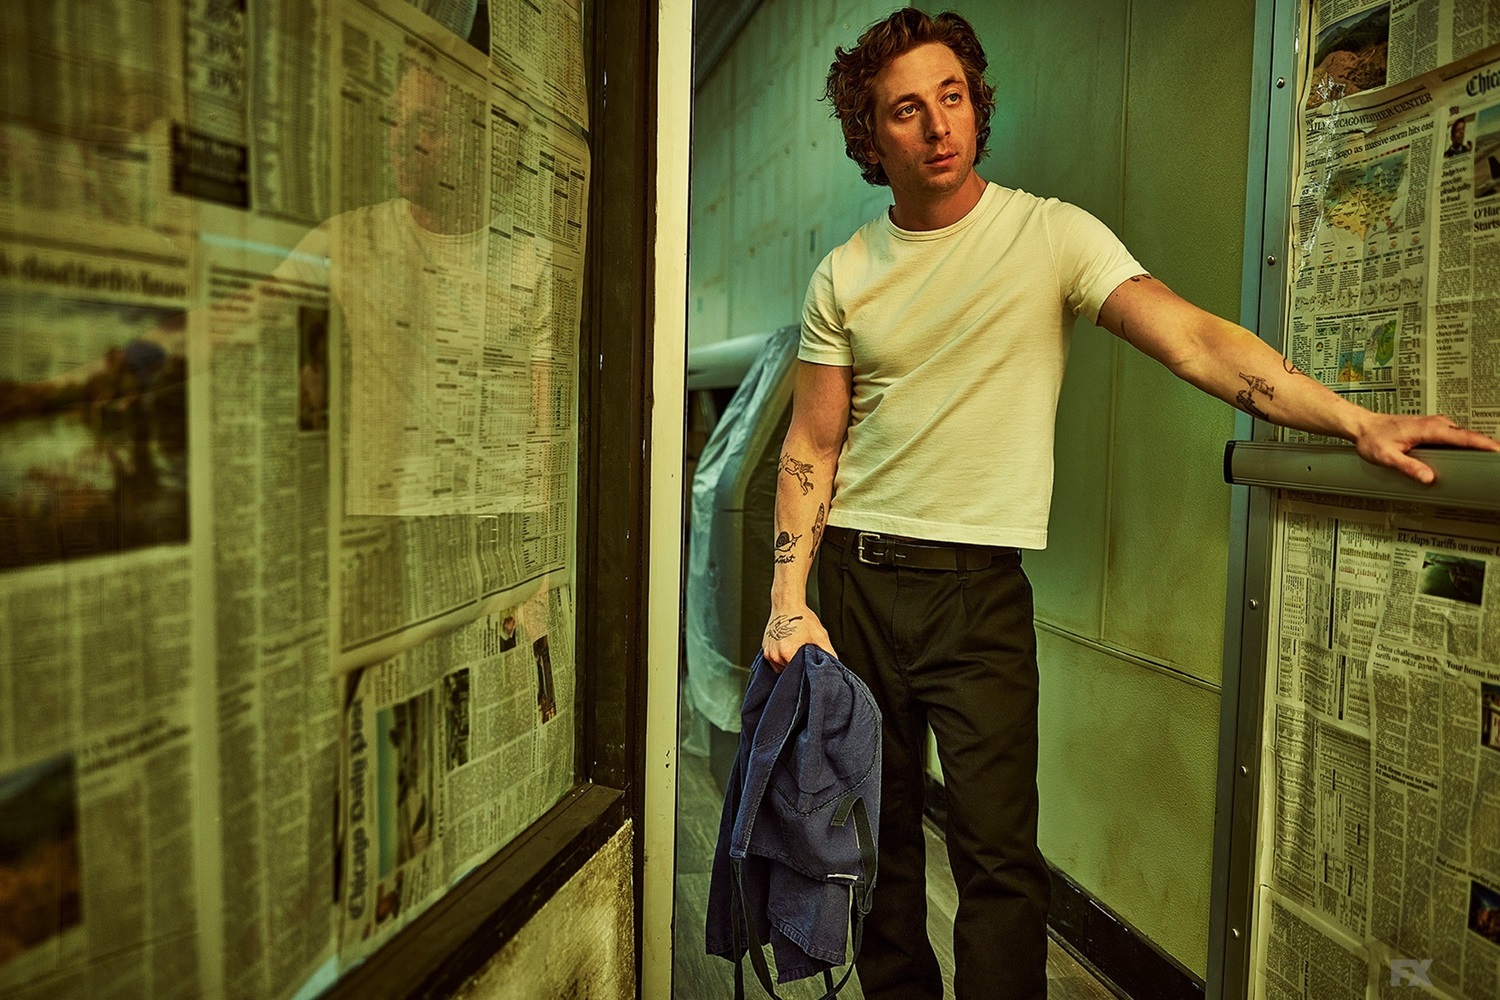 Jeremy Allen White has made 'the everyman style' trendy: 5 pieces